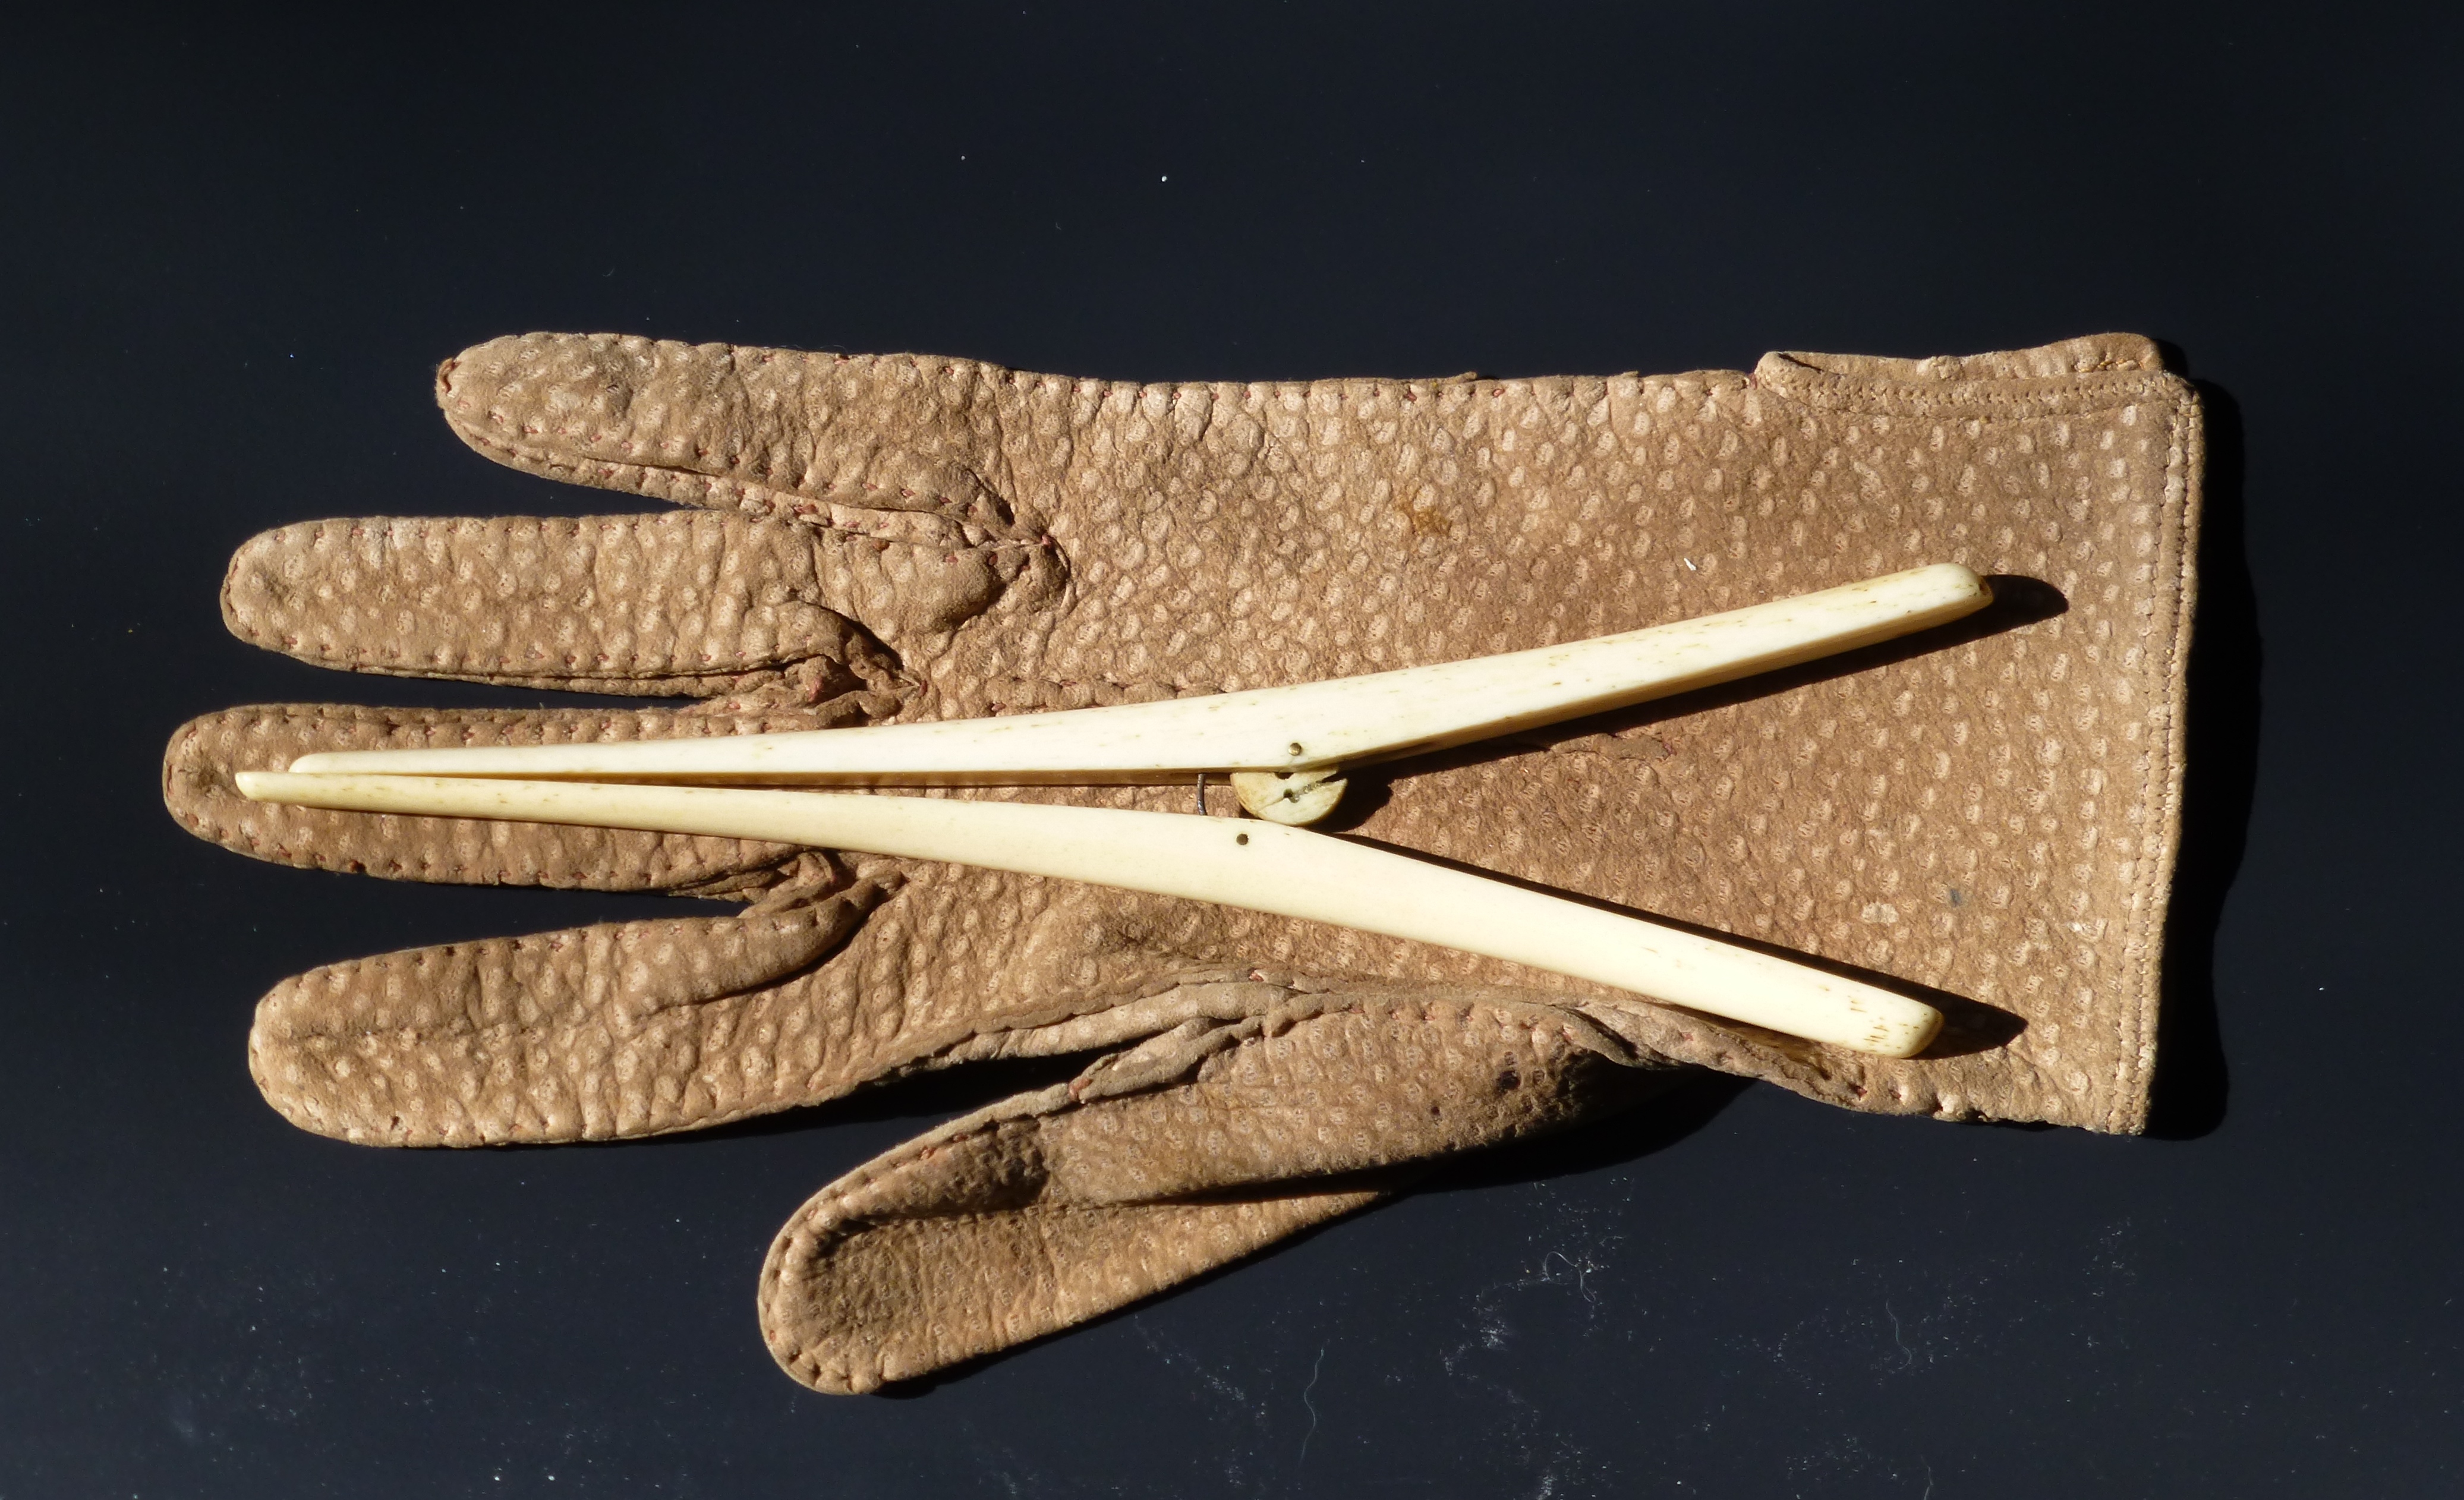 An ivory glove stretcher and leather glove: family heirlooms turned teaching tools. Courtesy of Abby Chandler.